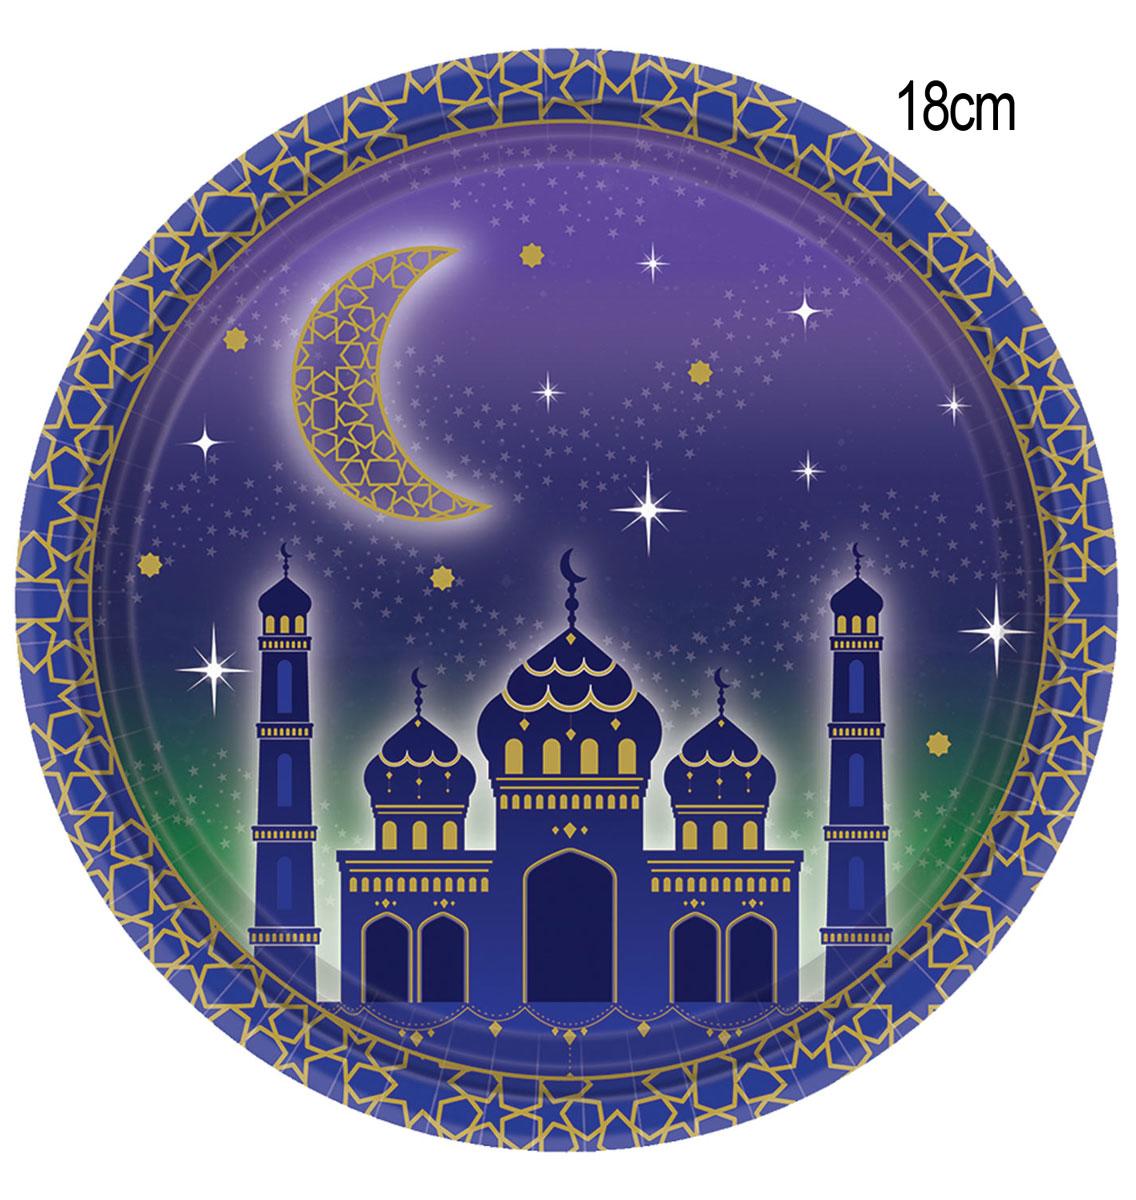 Eid Celebrations Paper Plates 18cm pk8 by Amscan 541962 available here at Karnival Costumes online party shop